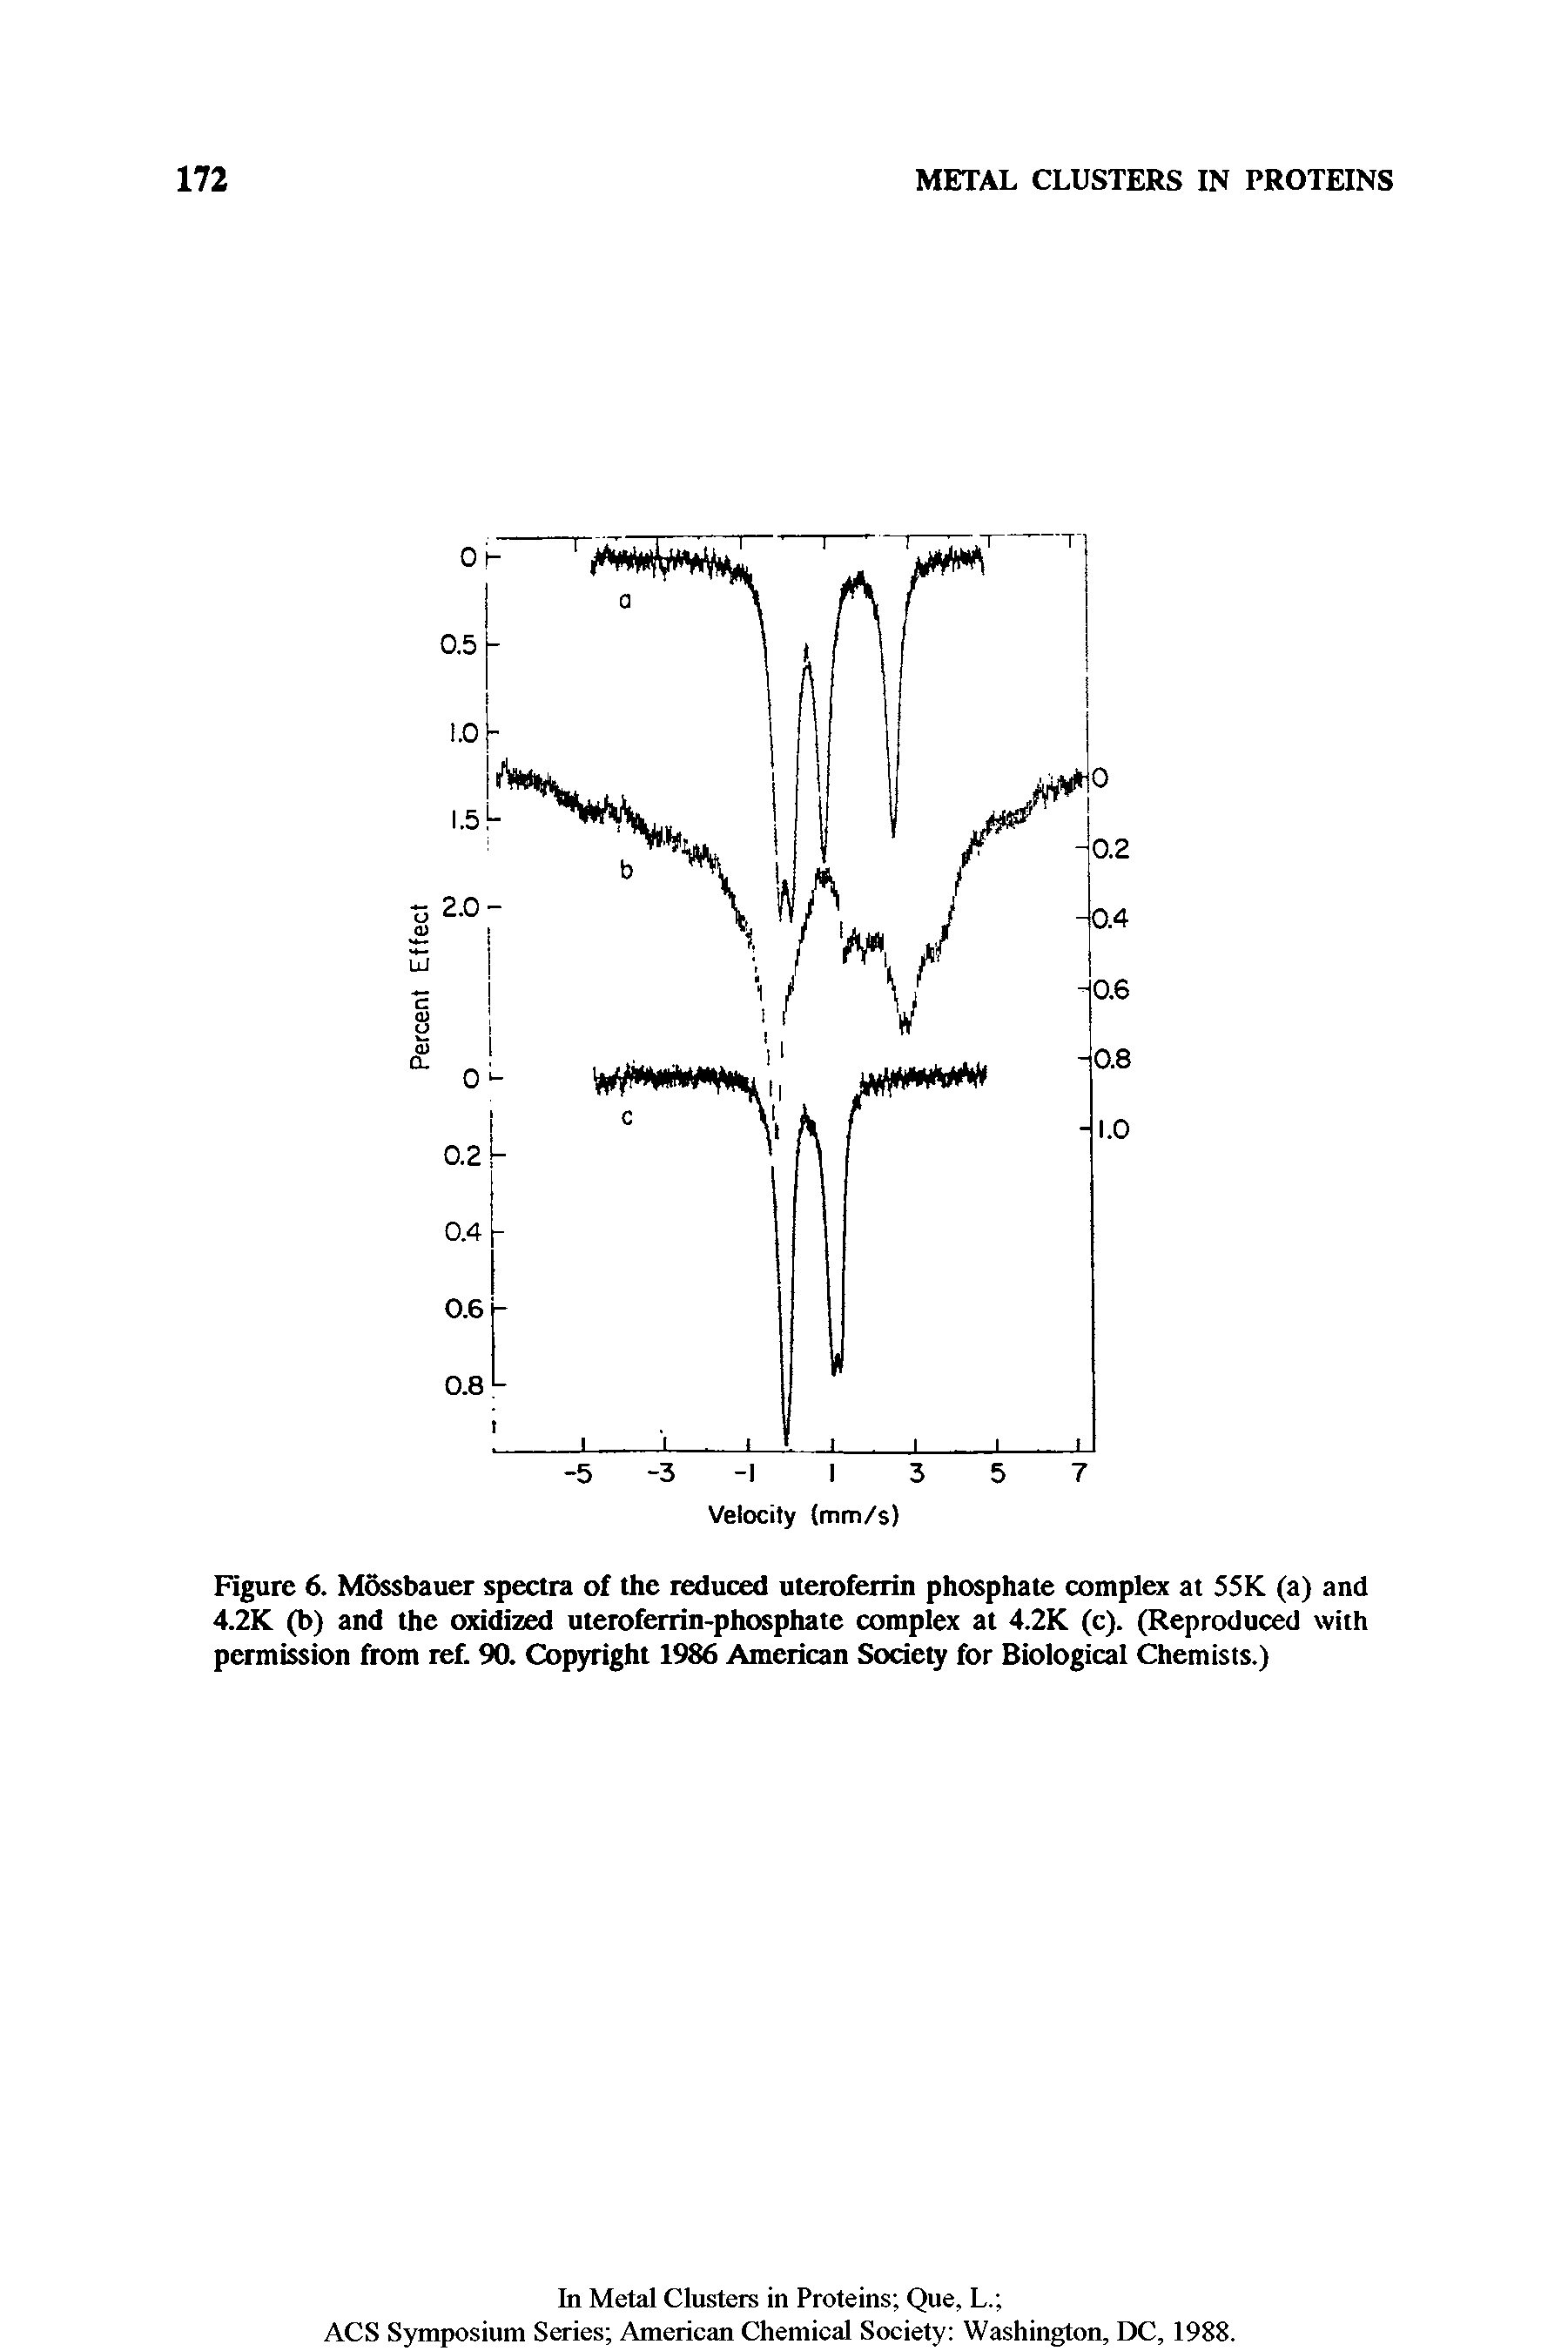 Figure 6. Mossbauer spectra of the reduced uteroferrin phosphate complex at 55K (a) and 4.2K (b) and the oxidized uteroferrin-phosphate complex at 4.2K (c). (Reproduced with permission from ref. 90. Copyright 1986 American Society for Biological Chemists.)...